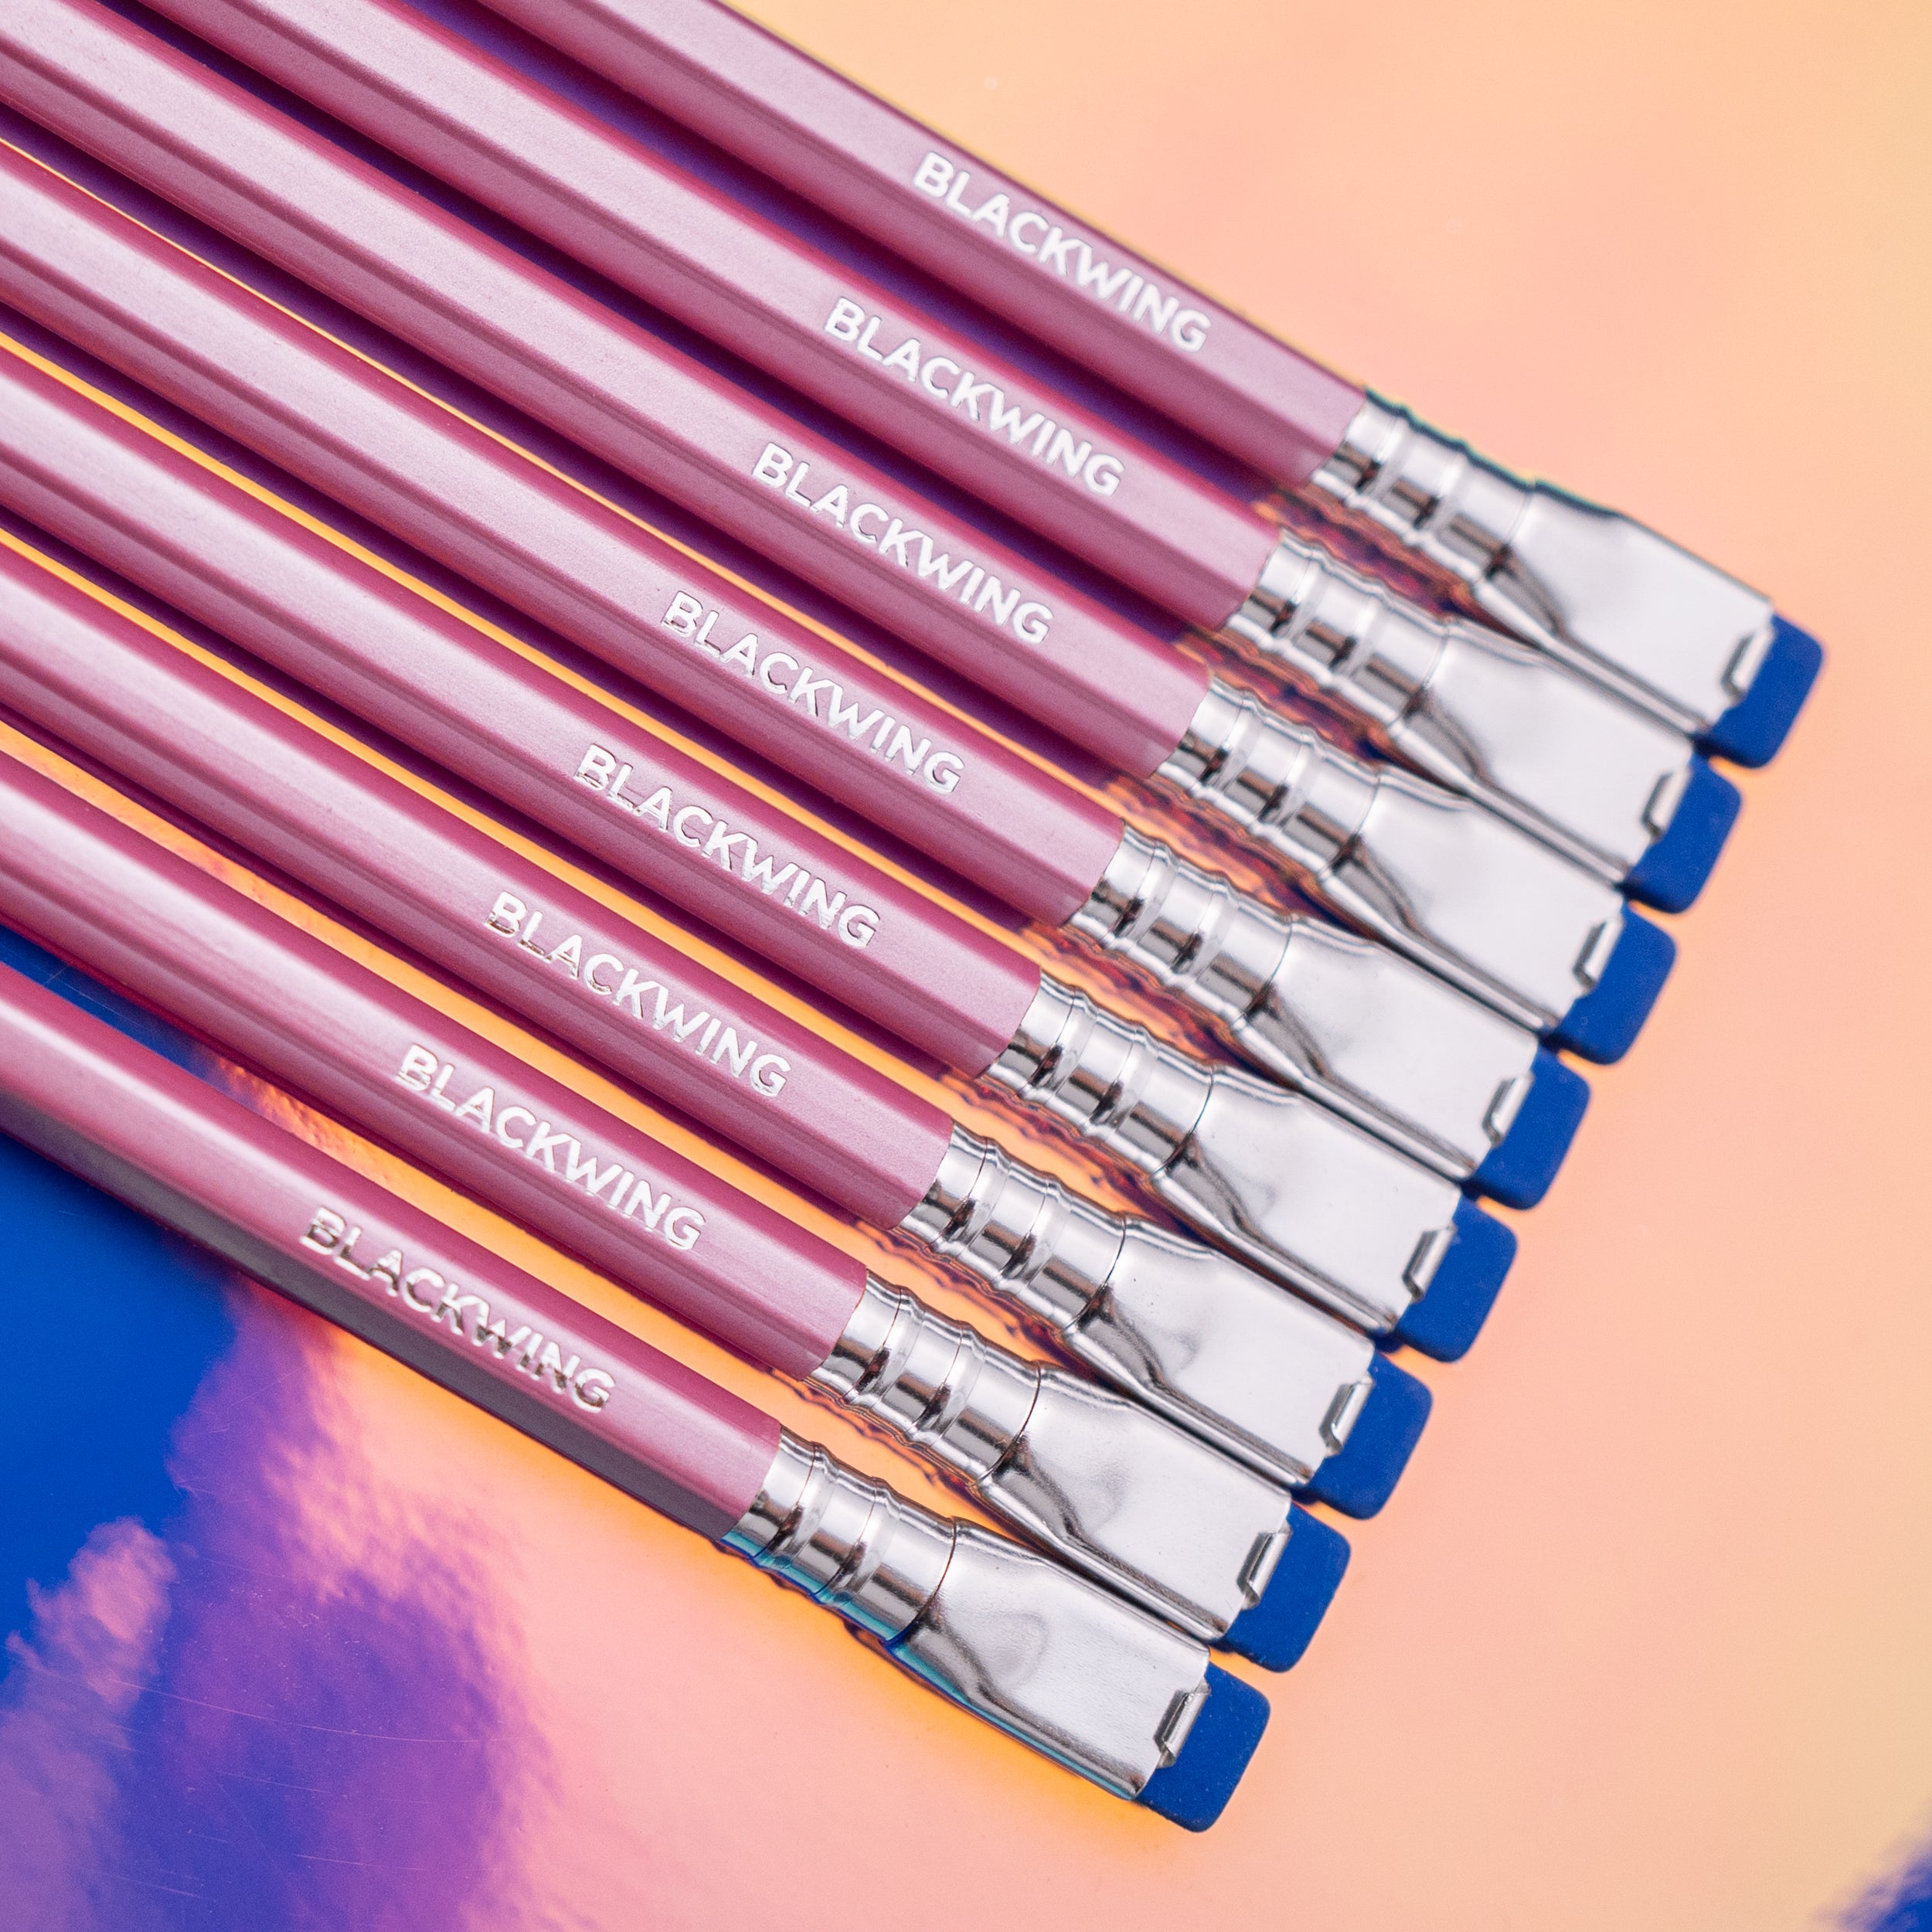 A set of Blackwing Pearl - Pink pencils on a colorful surface.